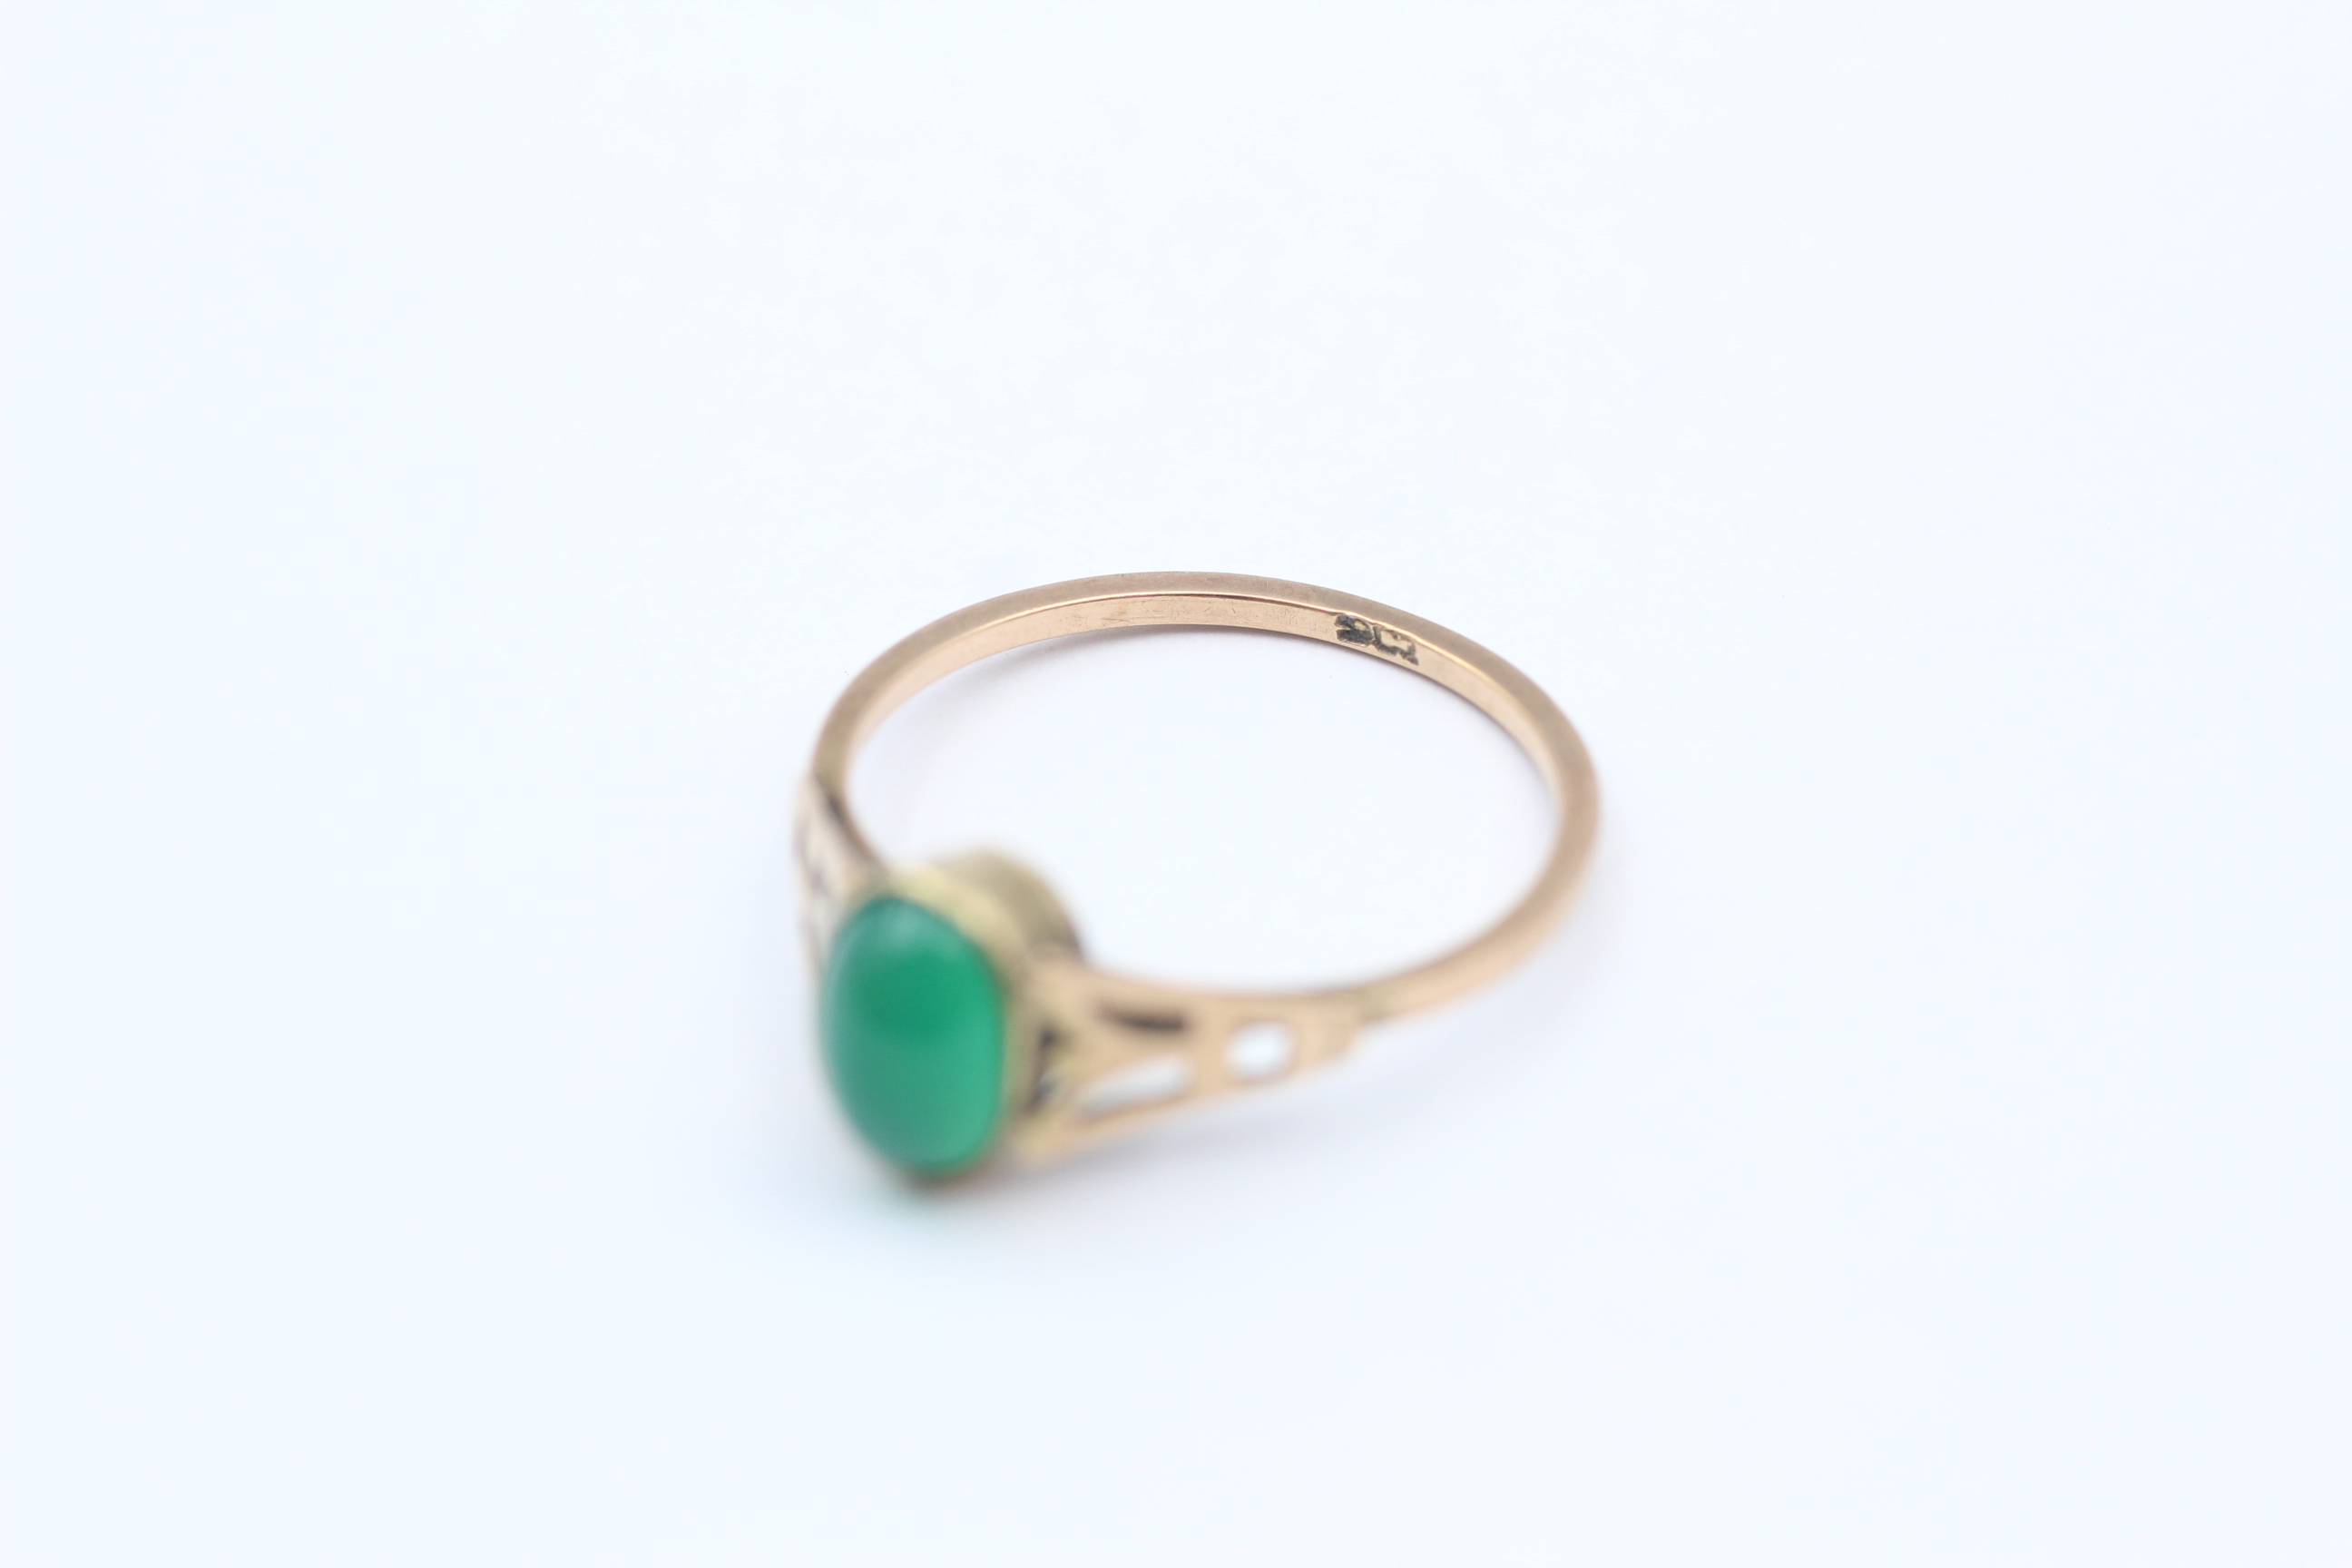 9ct Gold Chrysoprase Openwork Shoulders Ring - Image 4 of 4